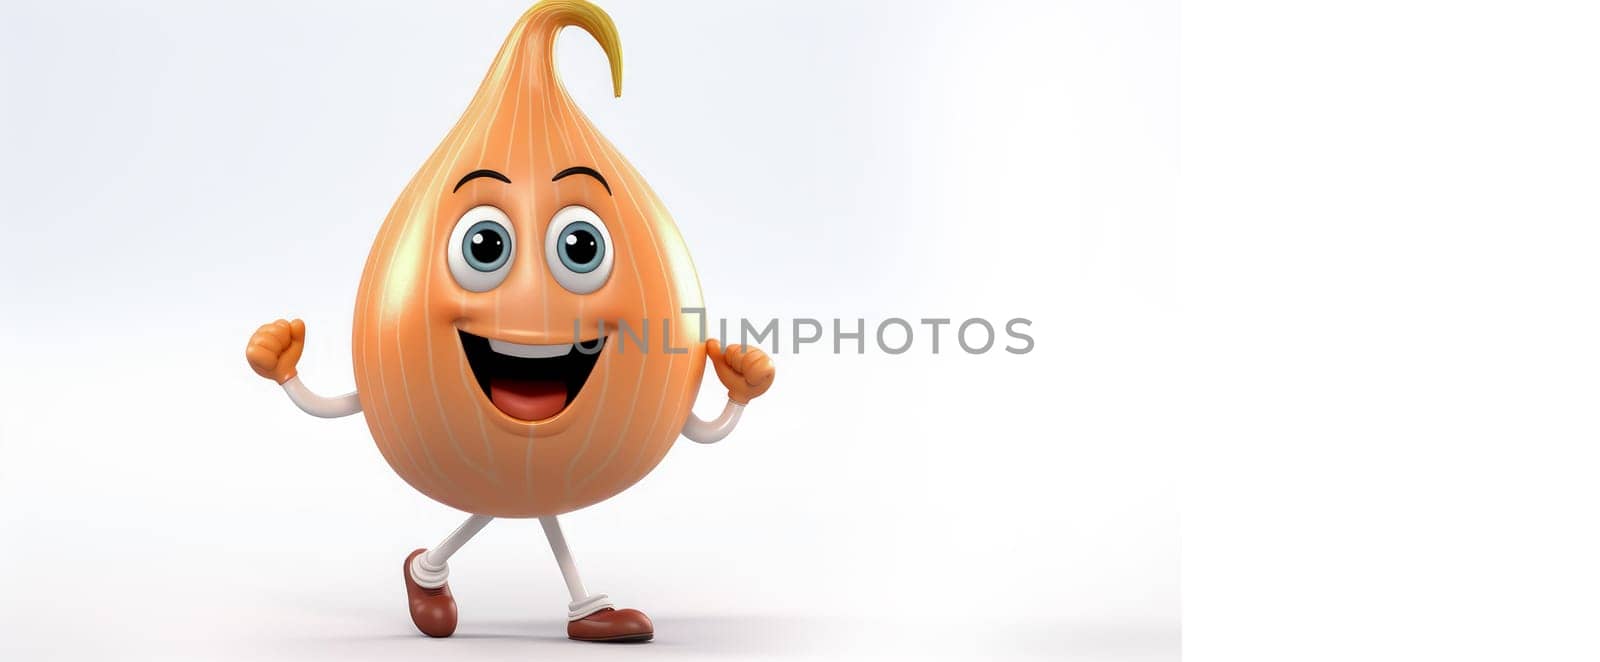 Onion with a cheerful face 3D on a white background. Cartoon characters, three-dimensional character, healthy lifestyle, proper nutrition, diet, fresh vegetables and fruits, vegetarianism, veganism, food, breakfast, fun, laughter, banner